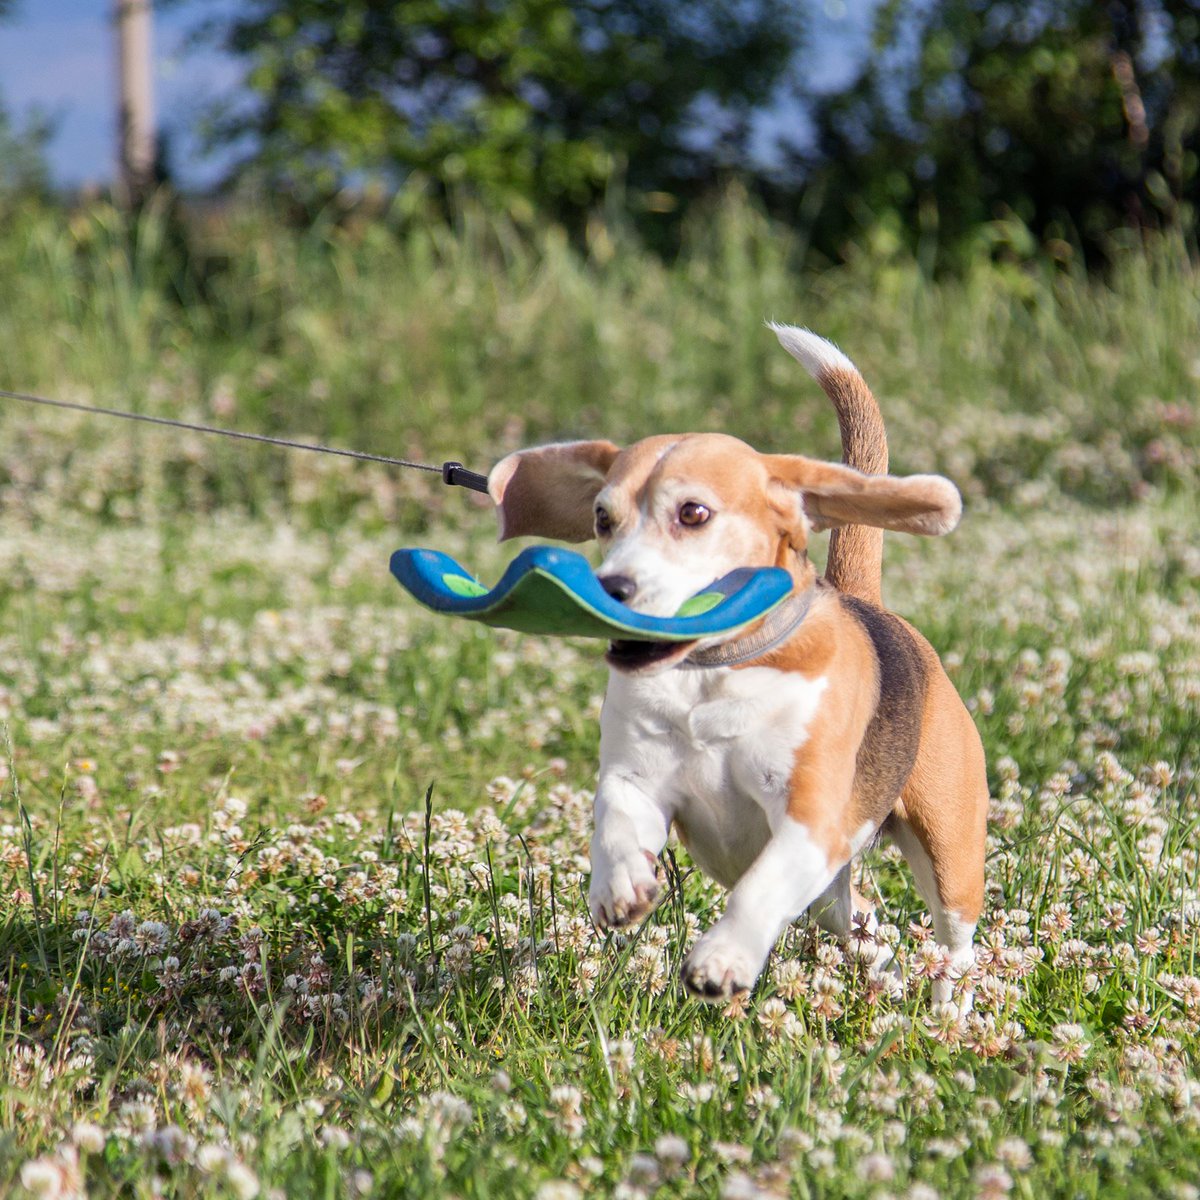 Happiness is running with a frisbee. 
#beagle #beaglelife @beaglefacts